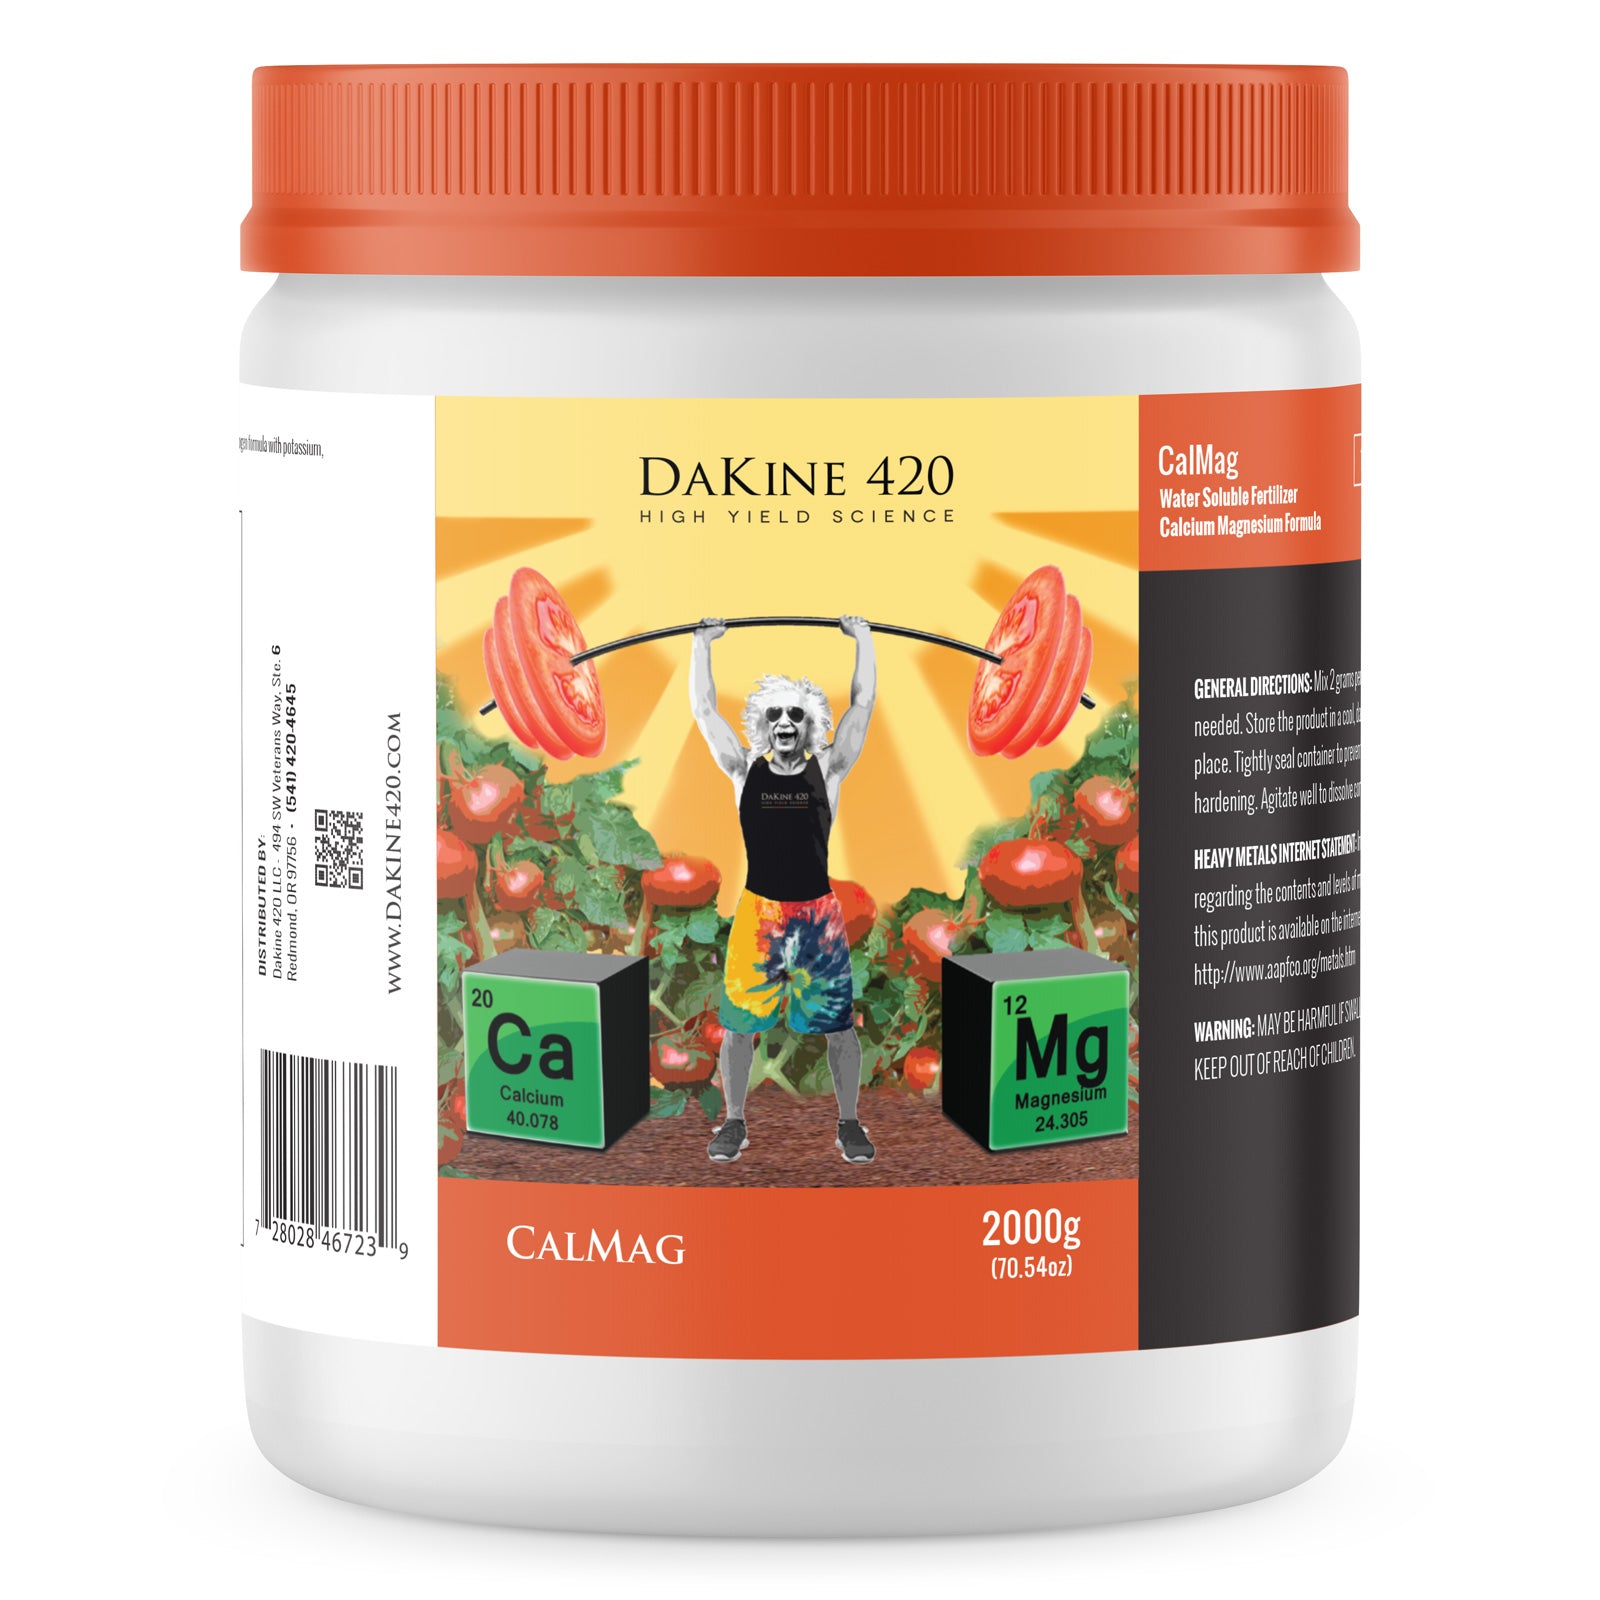 CalMag. It’s a delicious 12-2-12 product containing 6% Calcium and 3% Magnesium for consistently beneficial results.